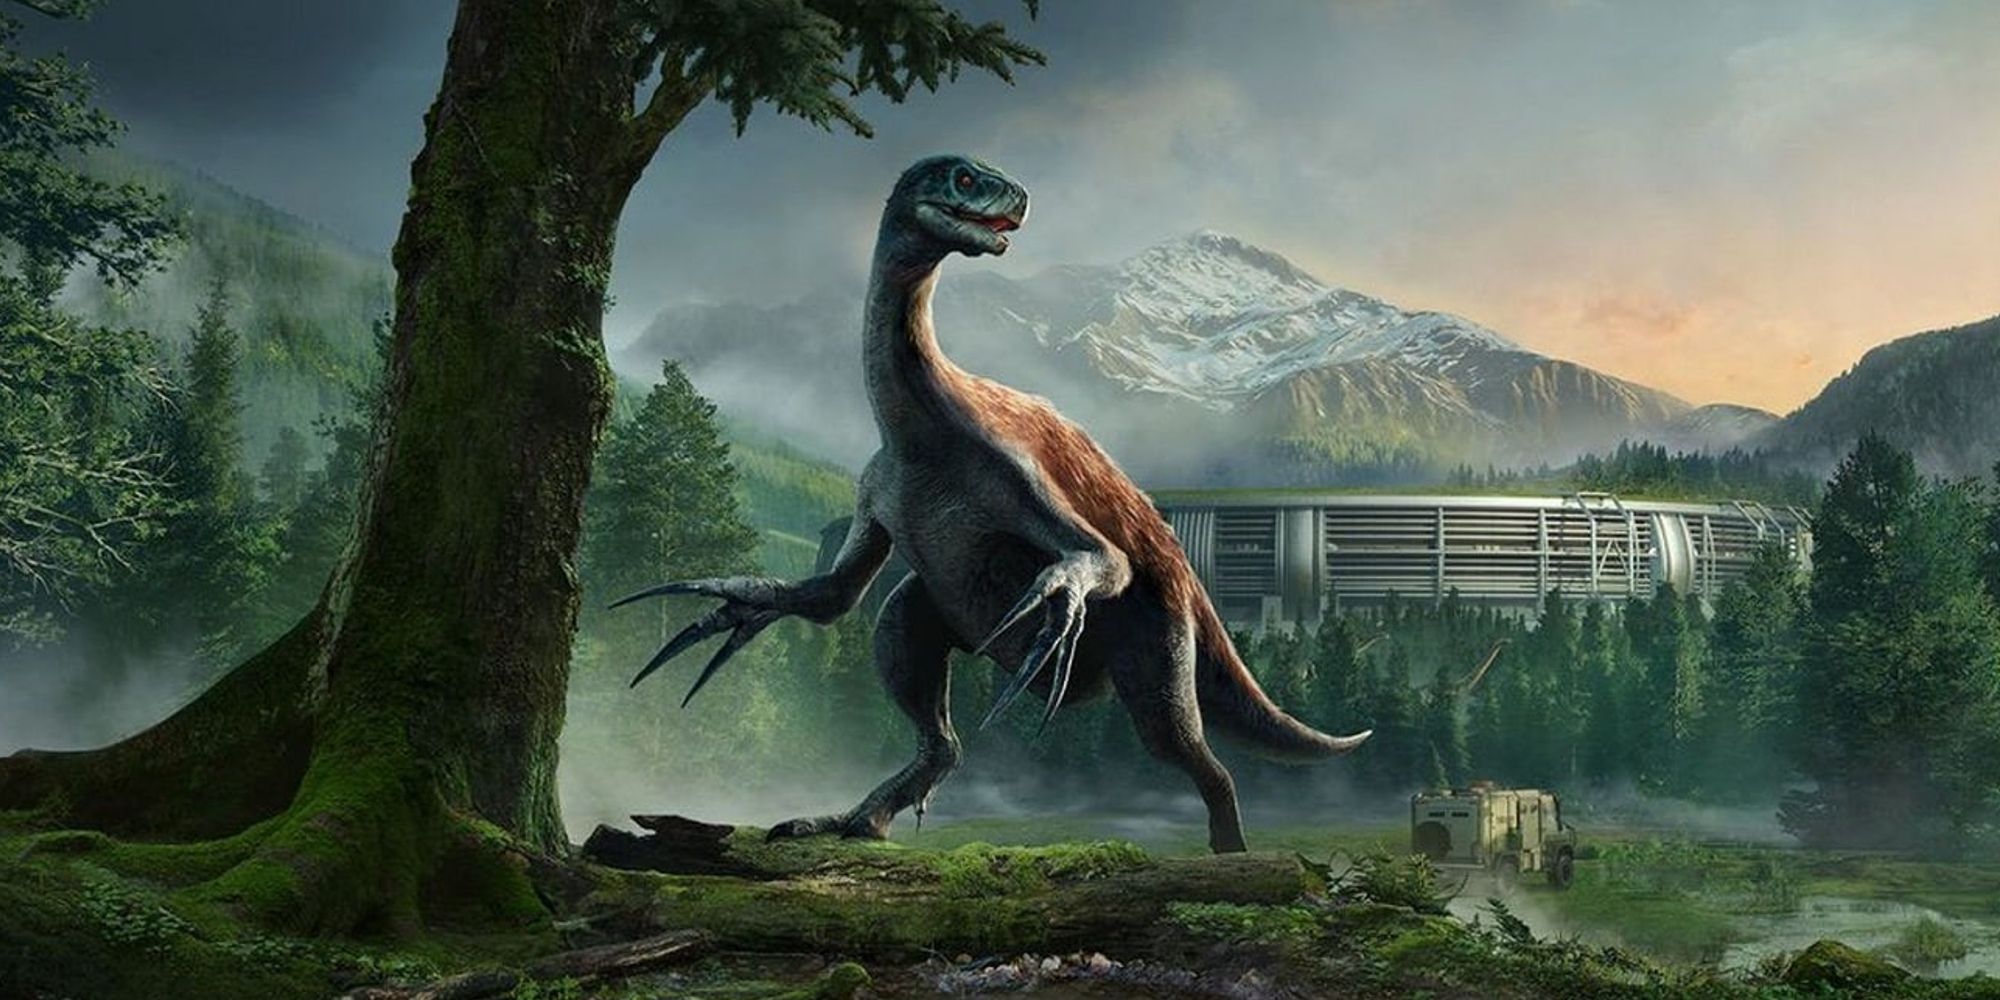 Official artwork for the Therizinosaurus in Jurassic World Dominion